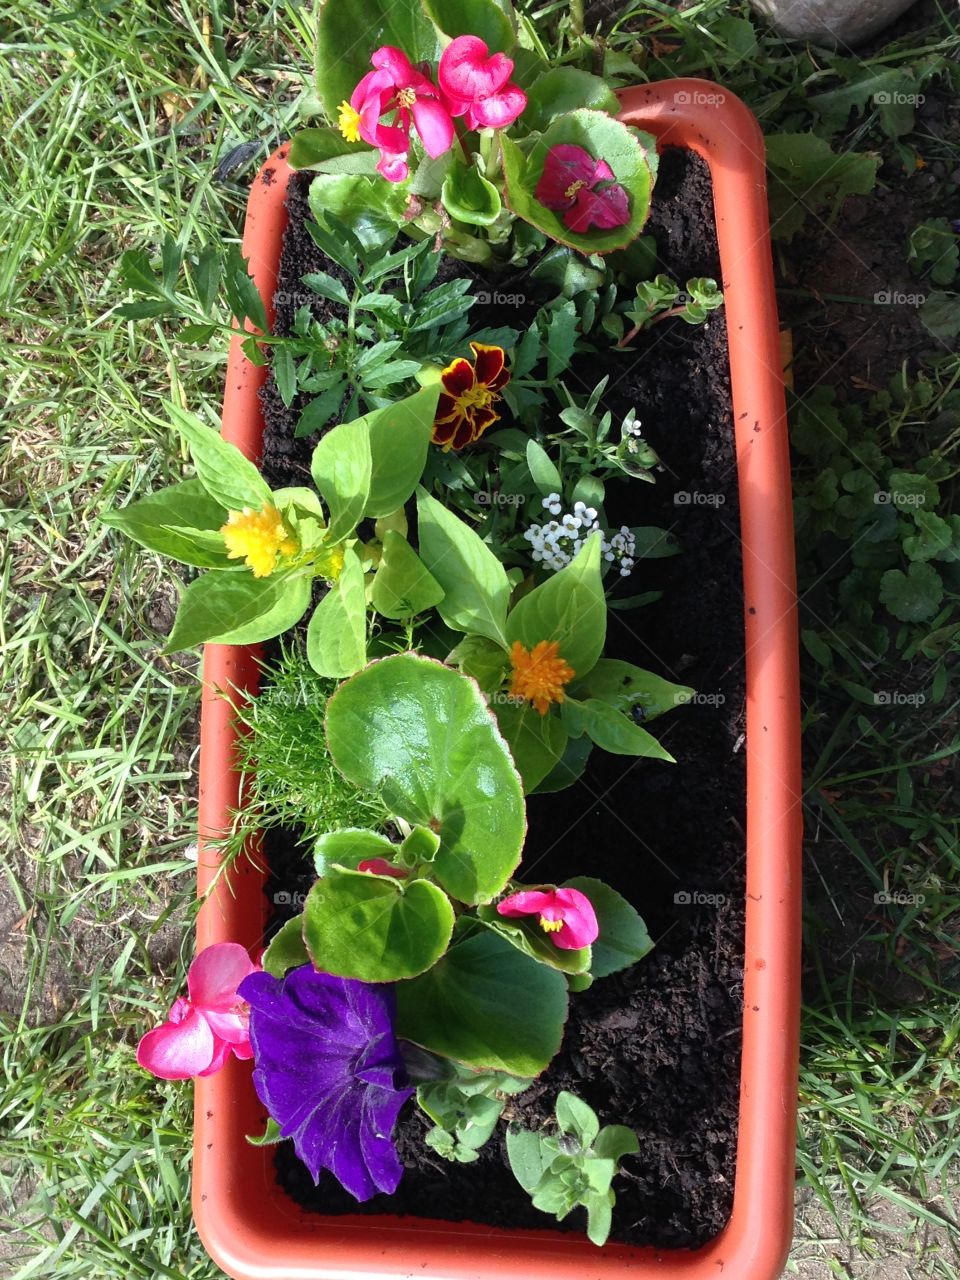 Starting the summer off with my daughters may birthday making personal flower gardens